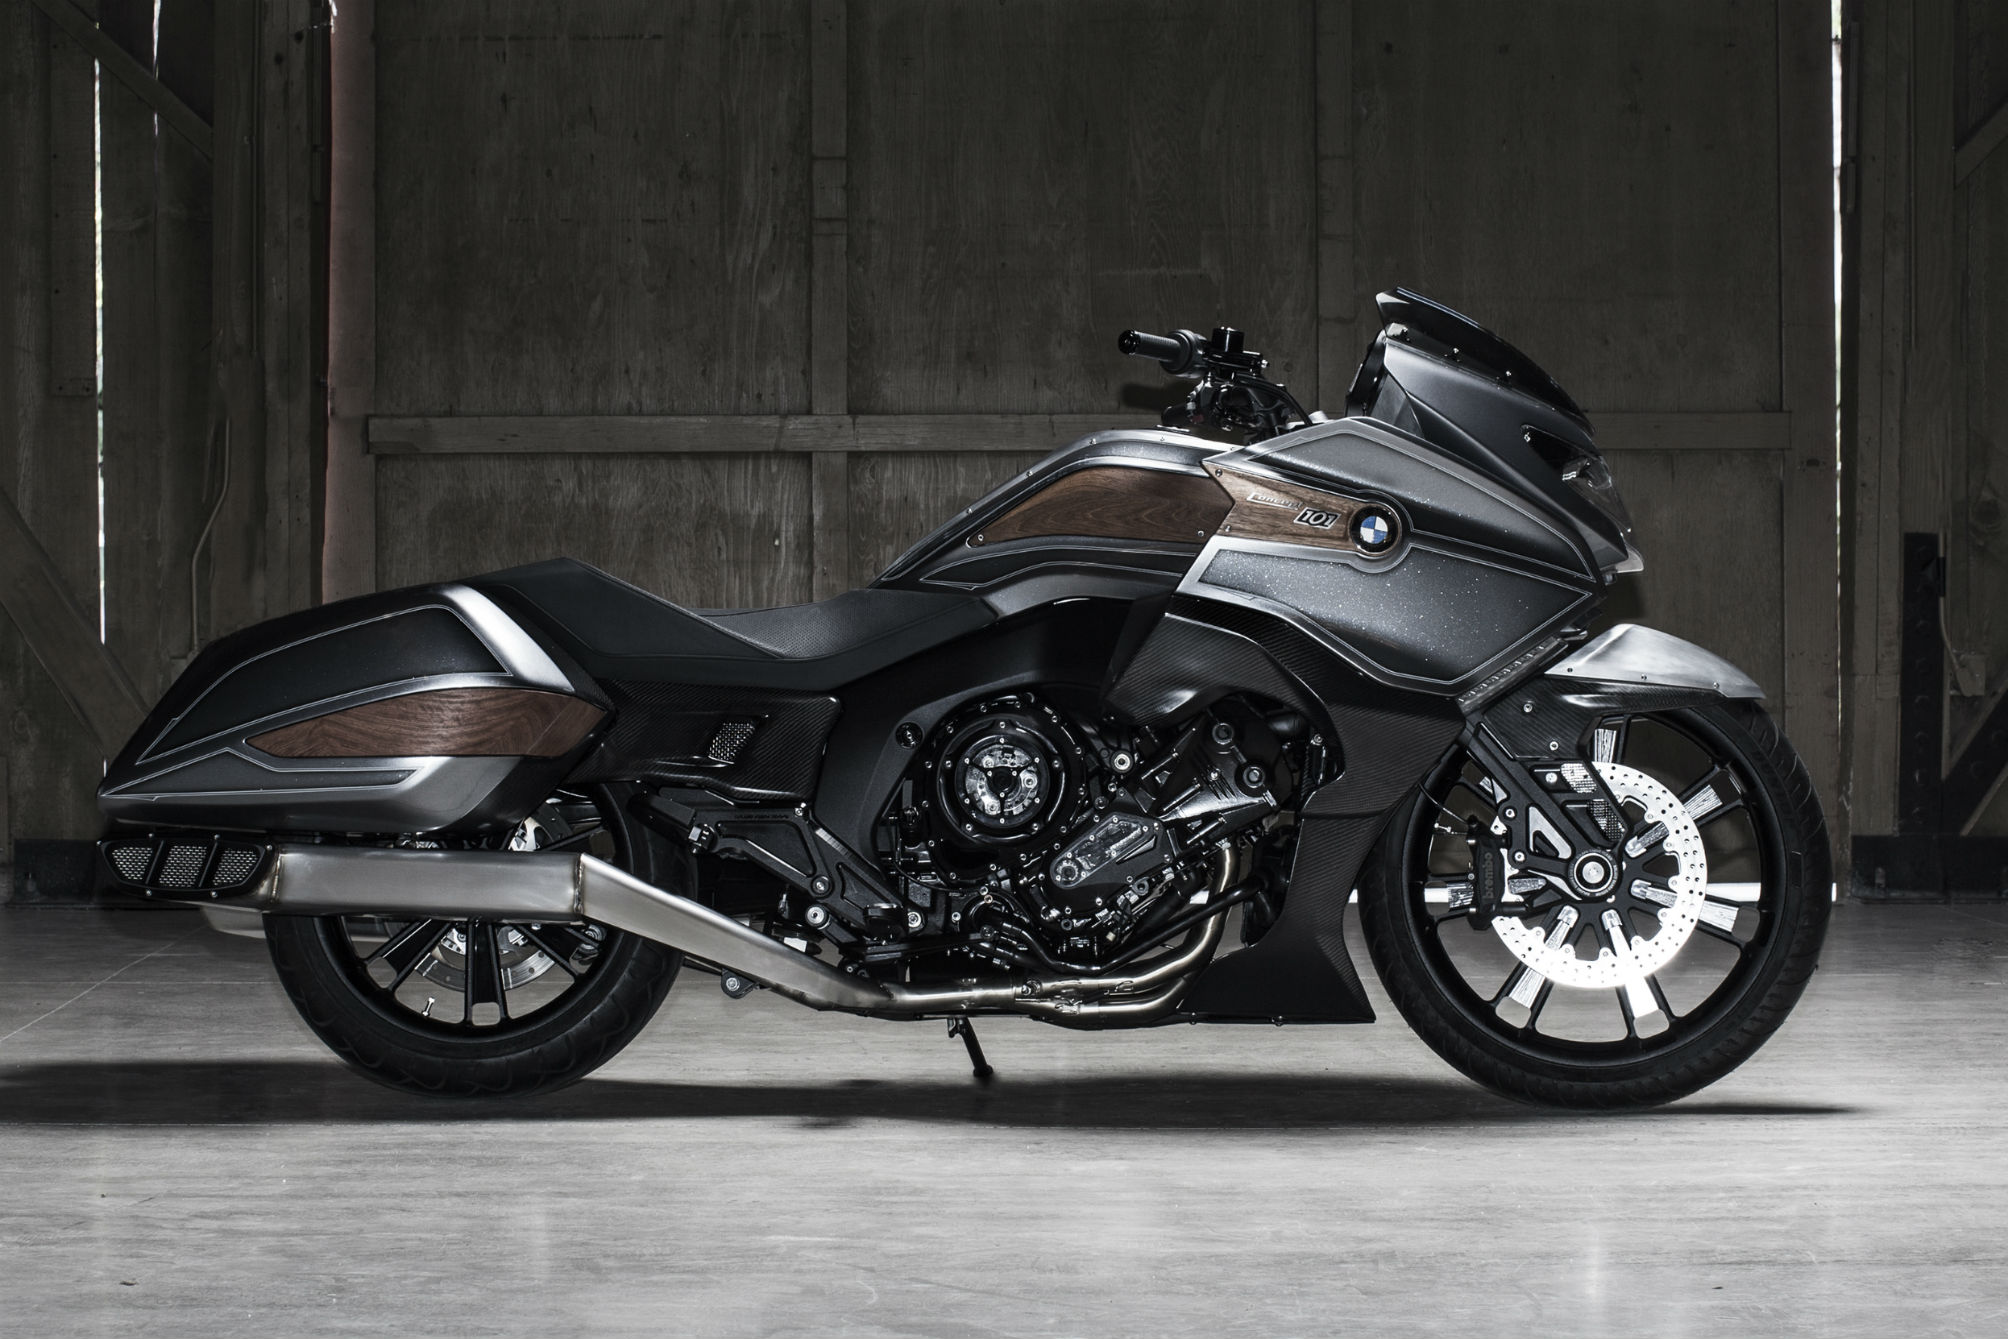 BMW Concept 101 – the K1600 bagger